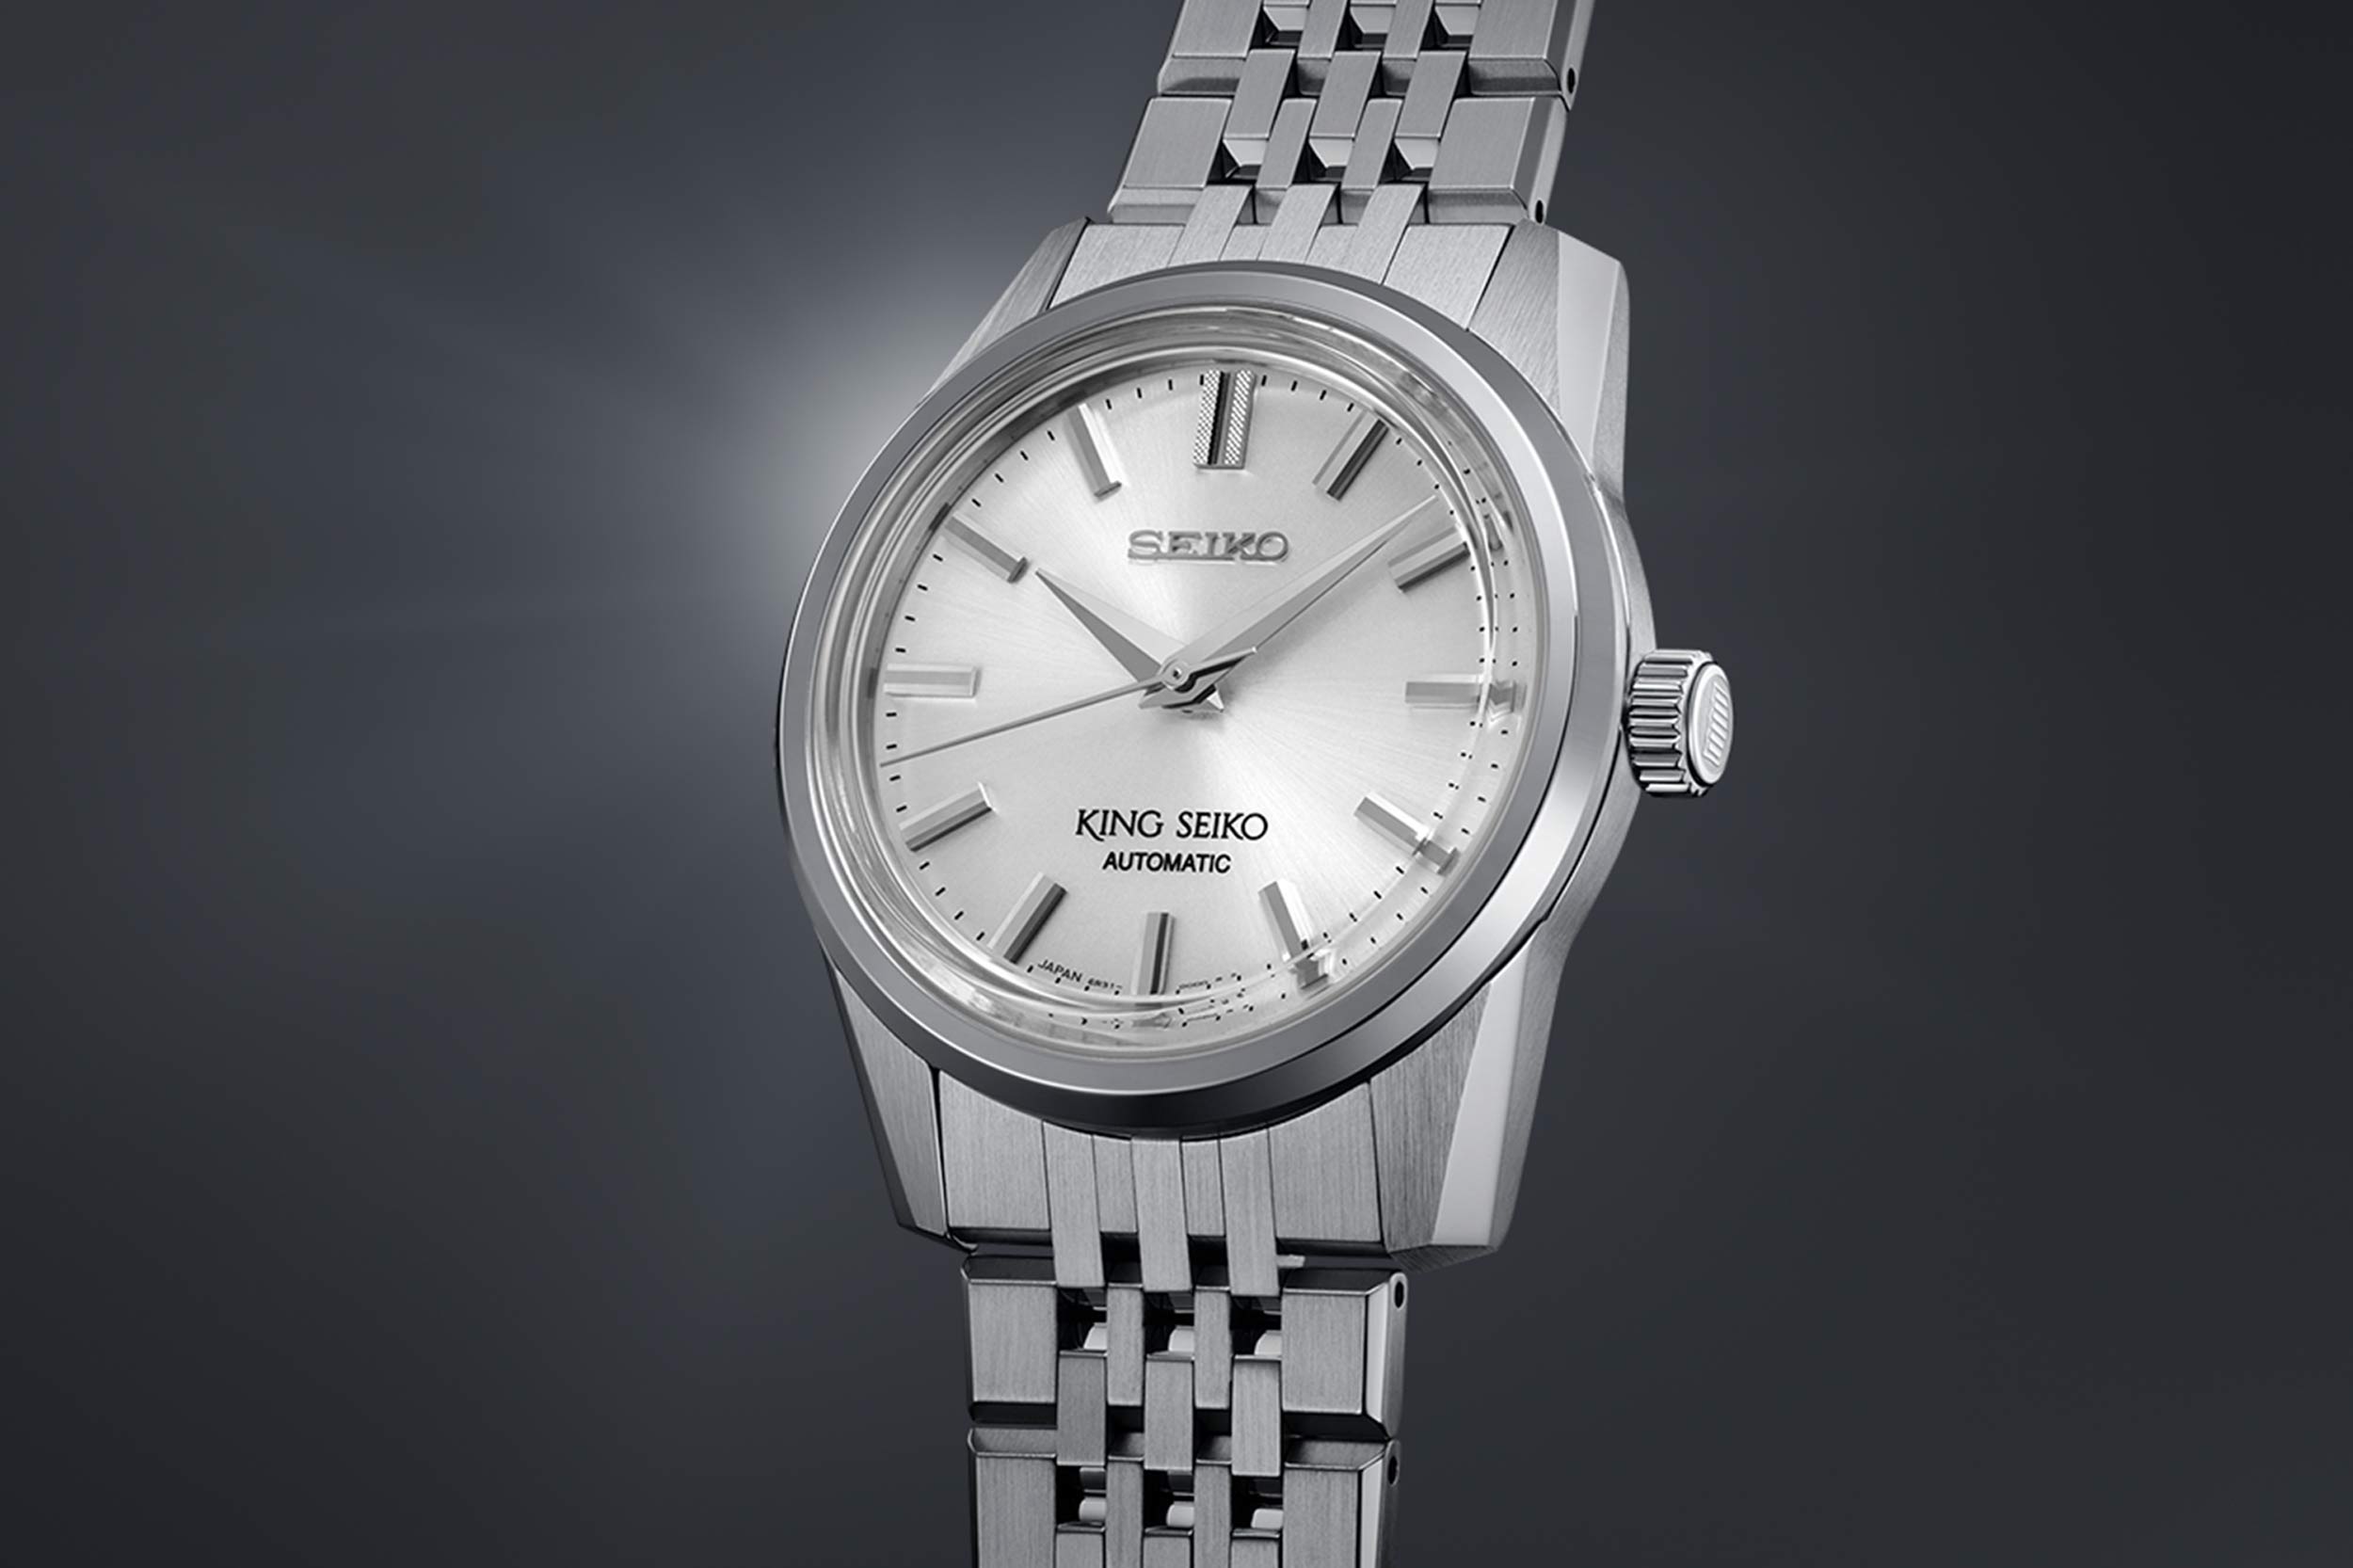 King Seiko Returns with a New Vintage Inspired Collection - Worn & Wound